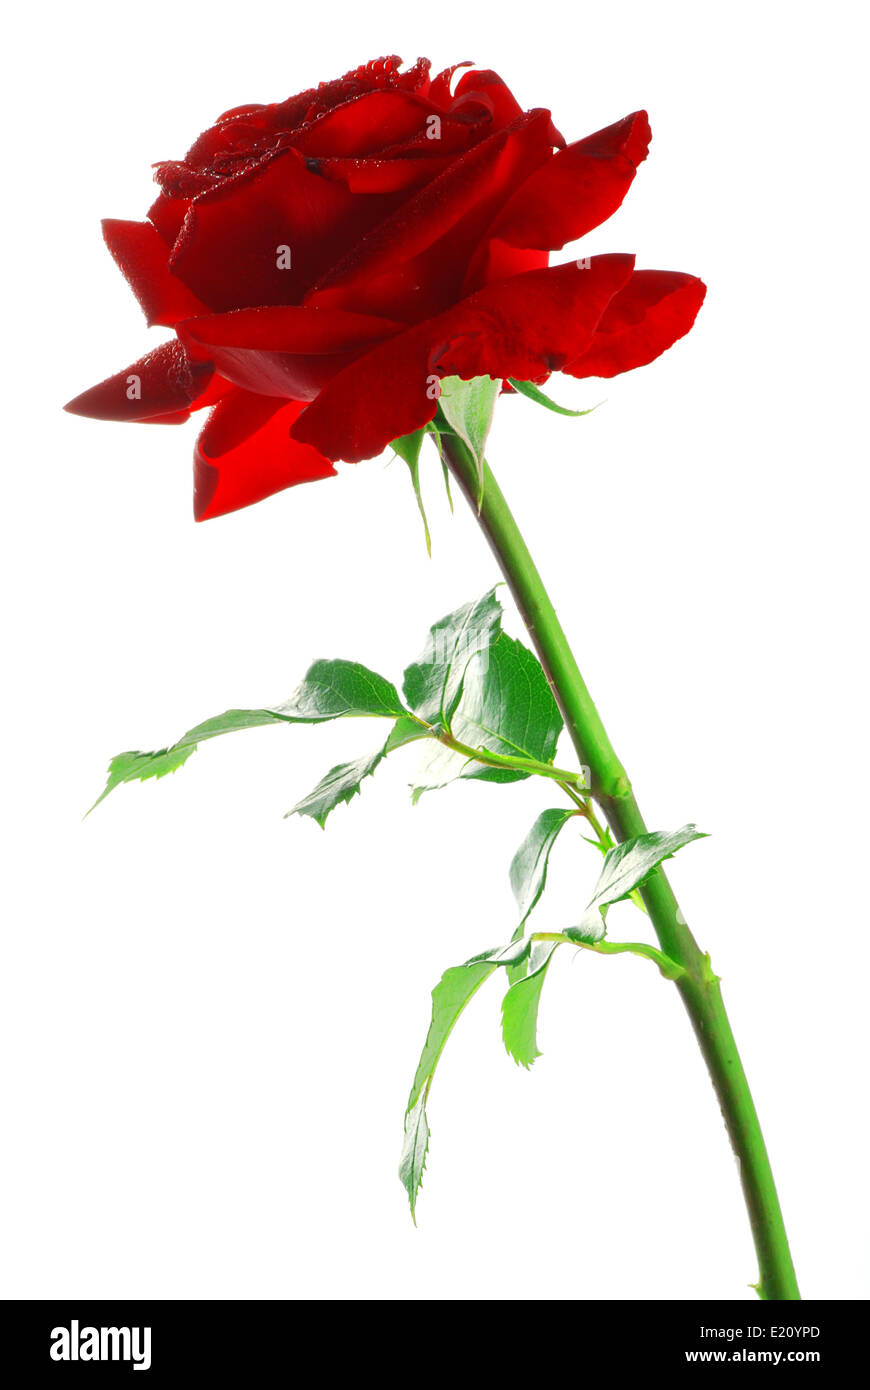 Beautiful red rose with leaves isolated on white Stock Photo - Alamy